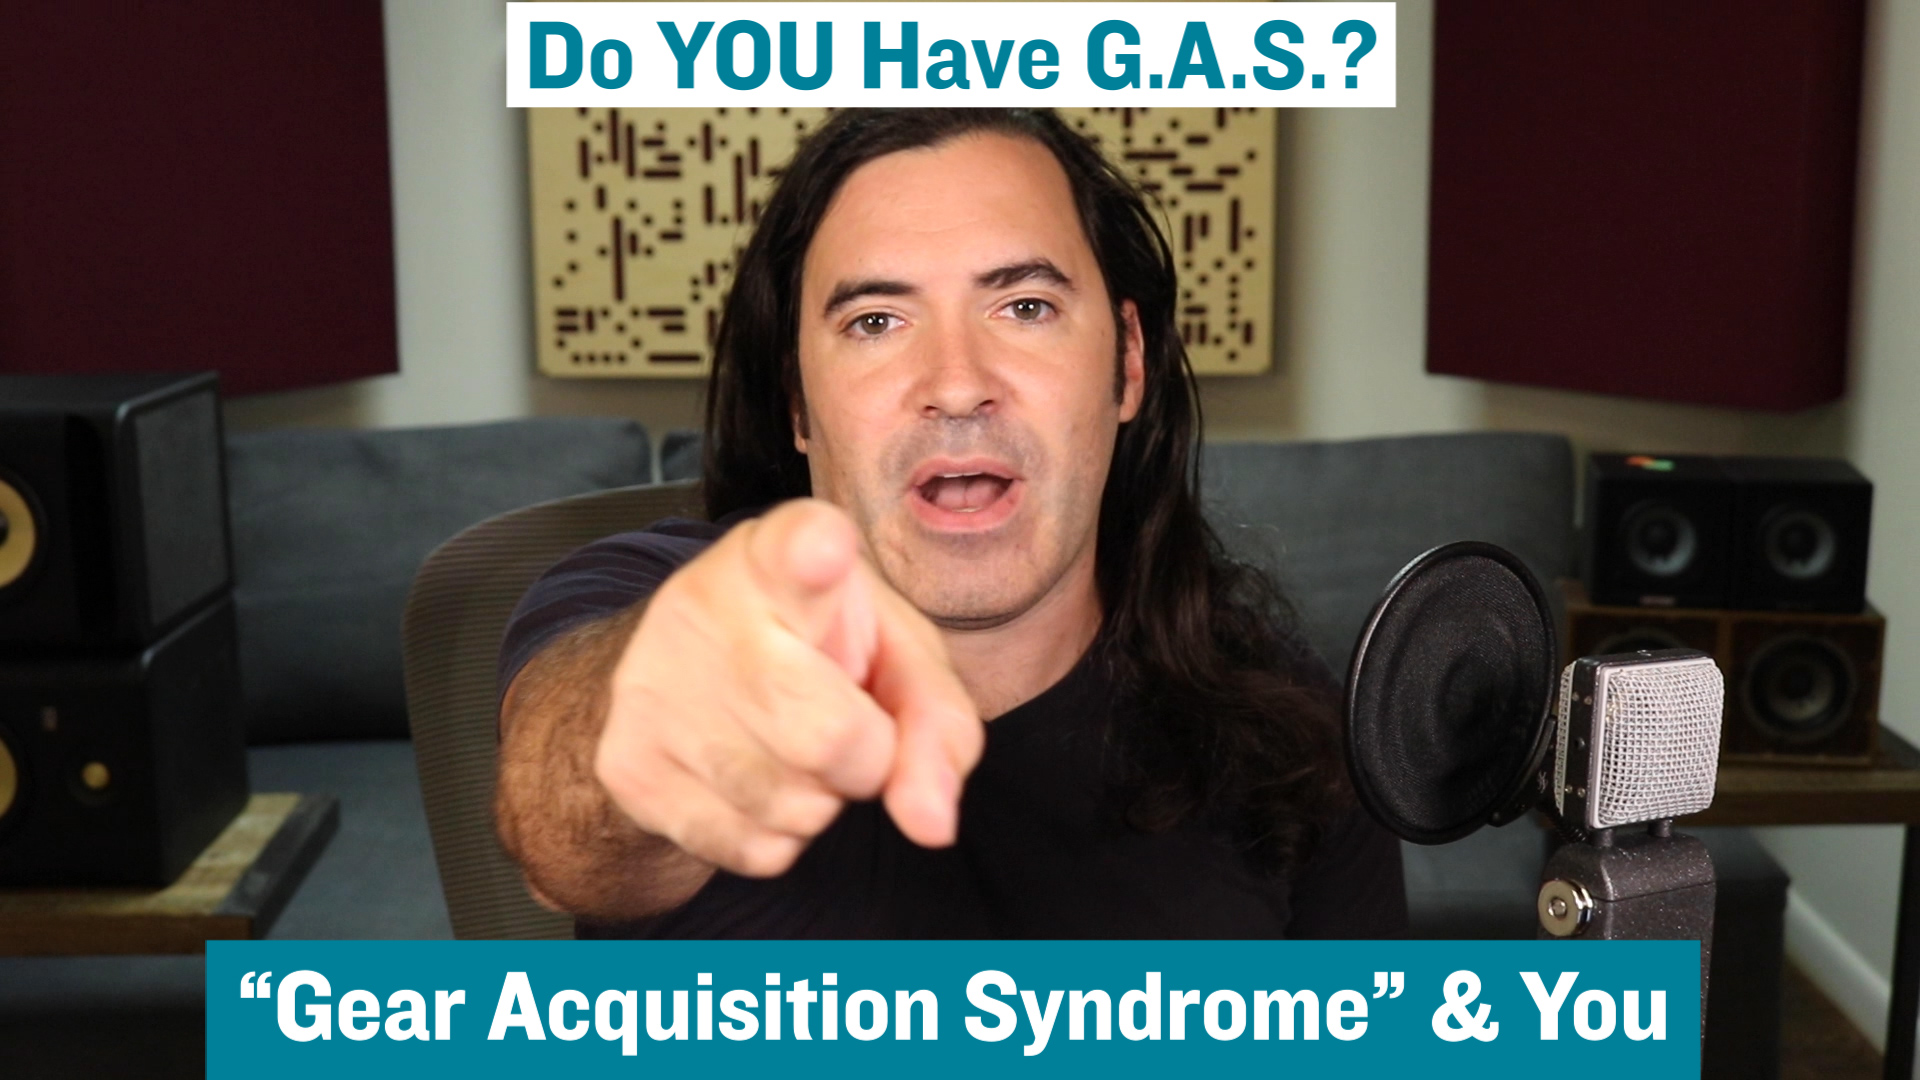 Do you have G.A.S.? (Gear Acquisition Syndrome)